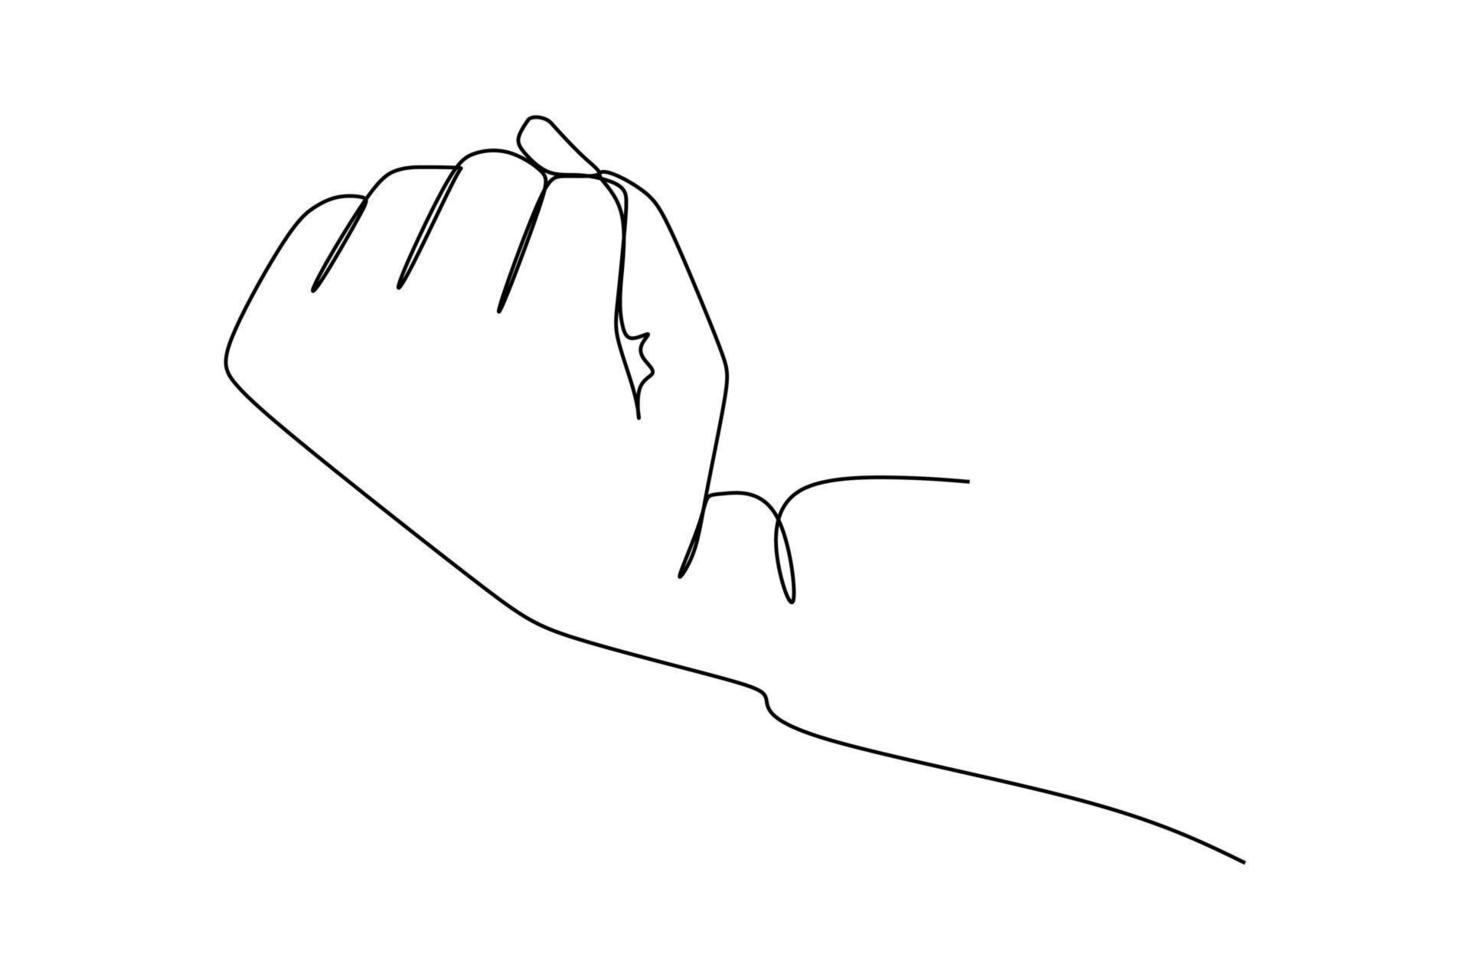 Continuous line drawing fist. One line hand with clenched fingers. Protest or revolution concept. Vector illustration. Hands Minimalist Contour Drawing. Vector EPS 10.